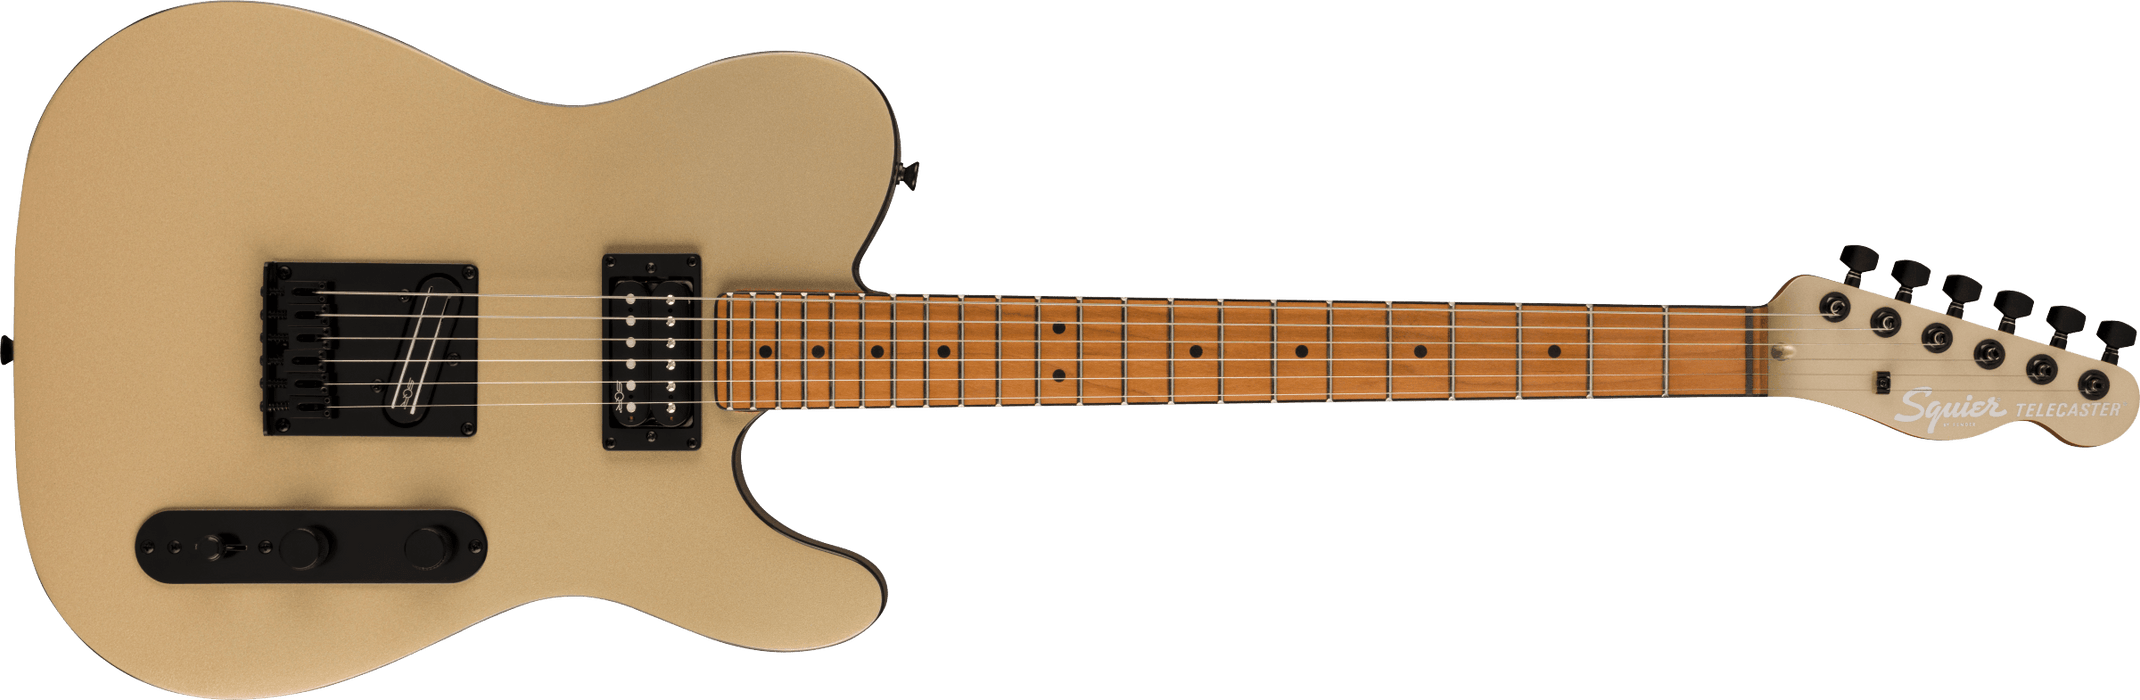 Pre-Owned Squier Contemporary Telecaster RH, Roasted Maple Fingerboard - Shoreline Gold